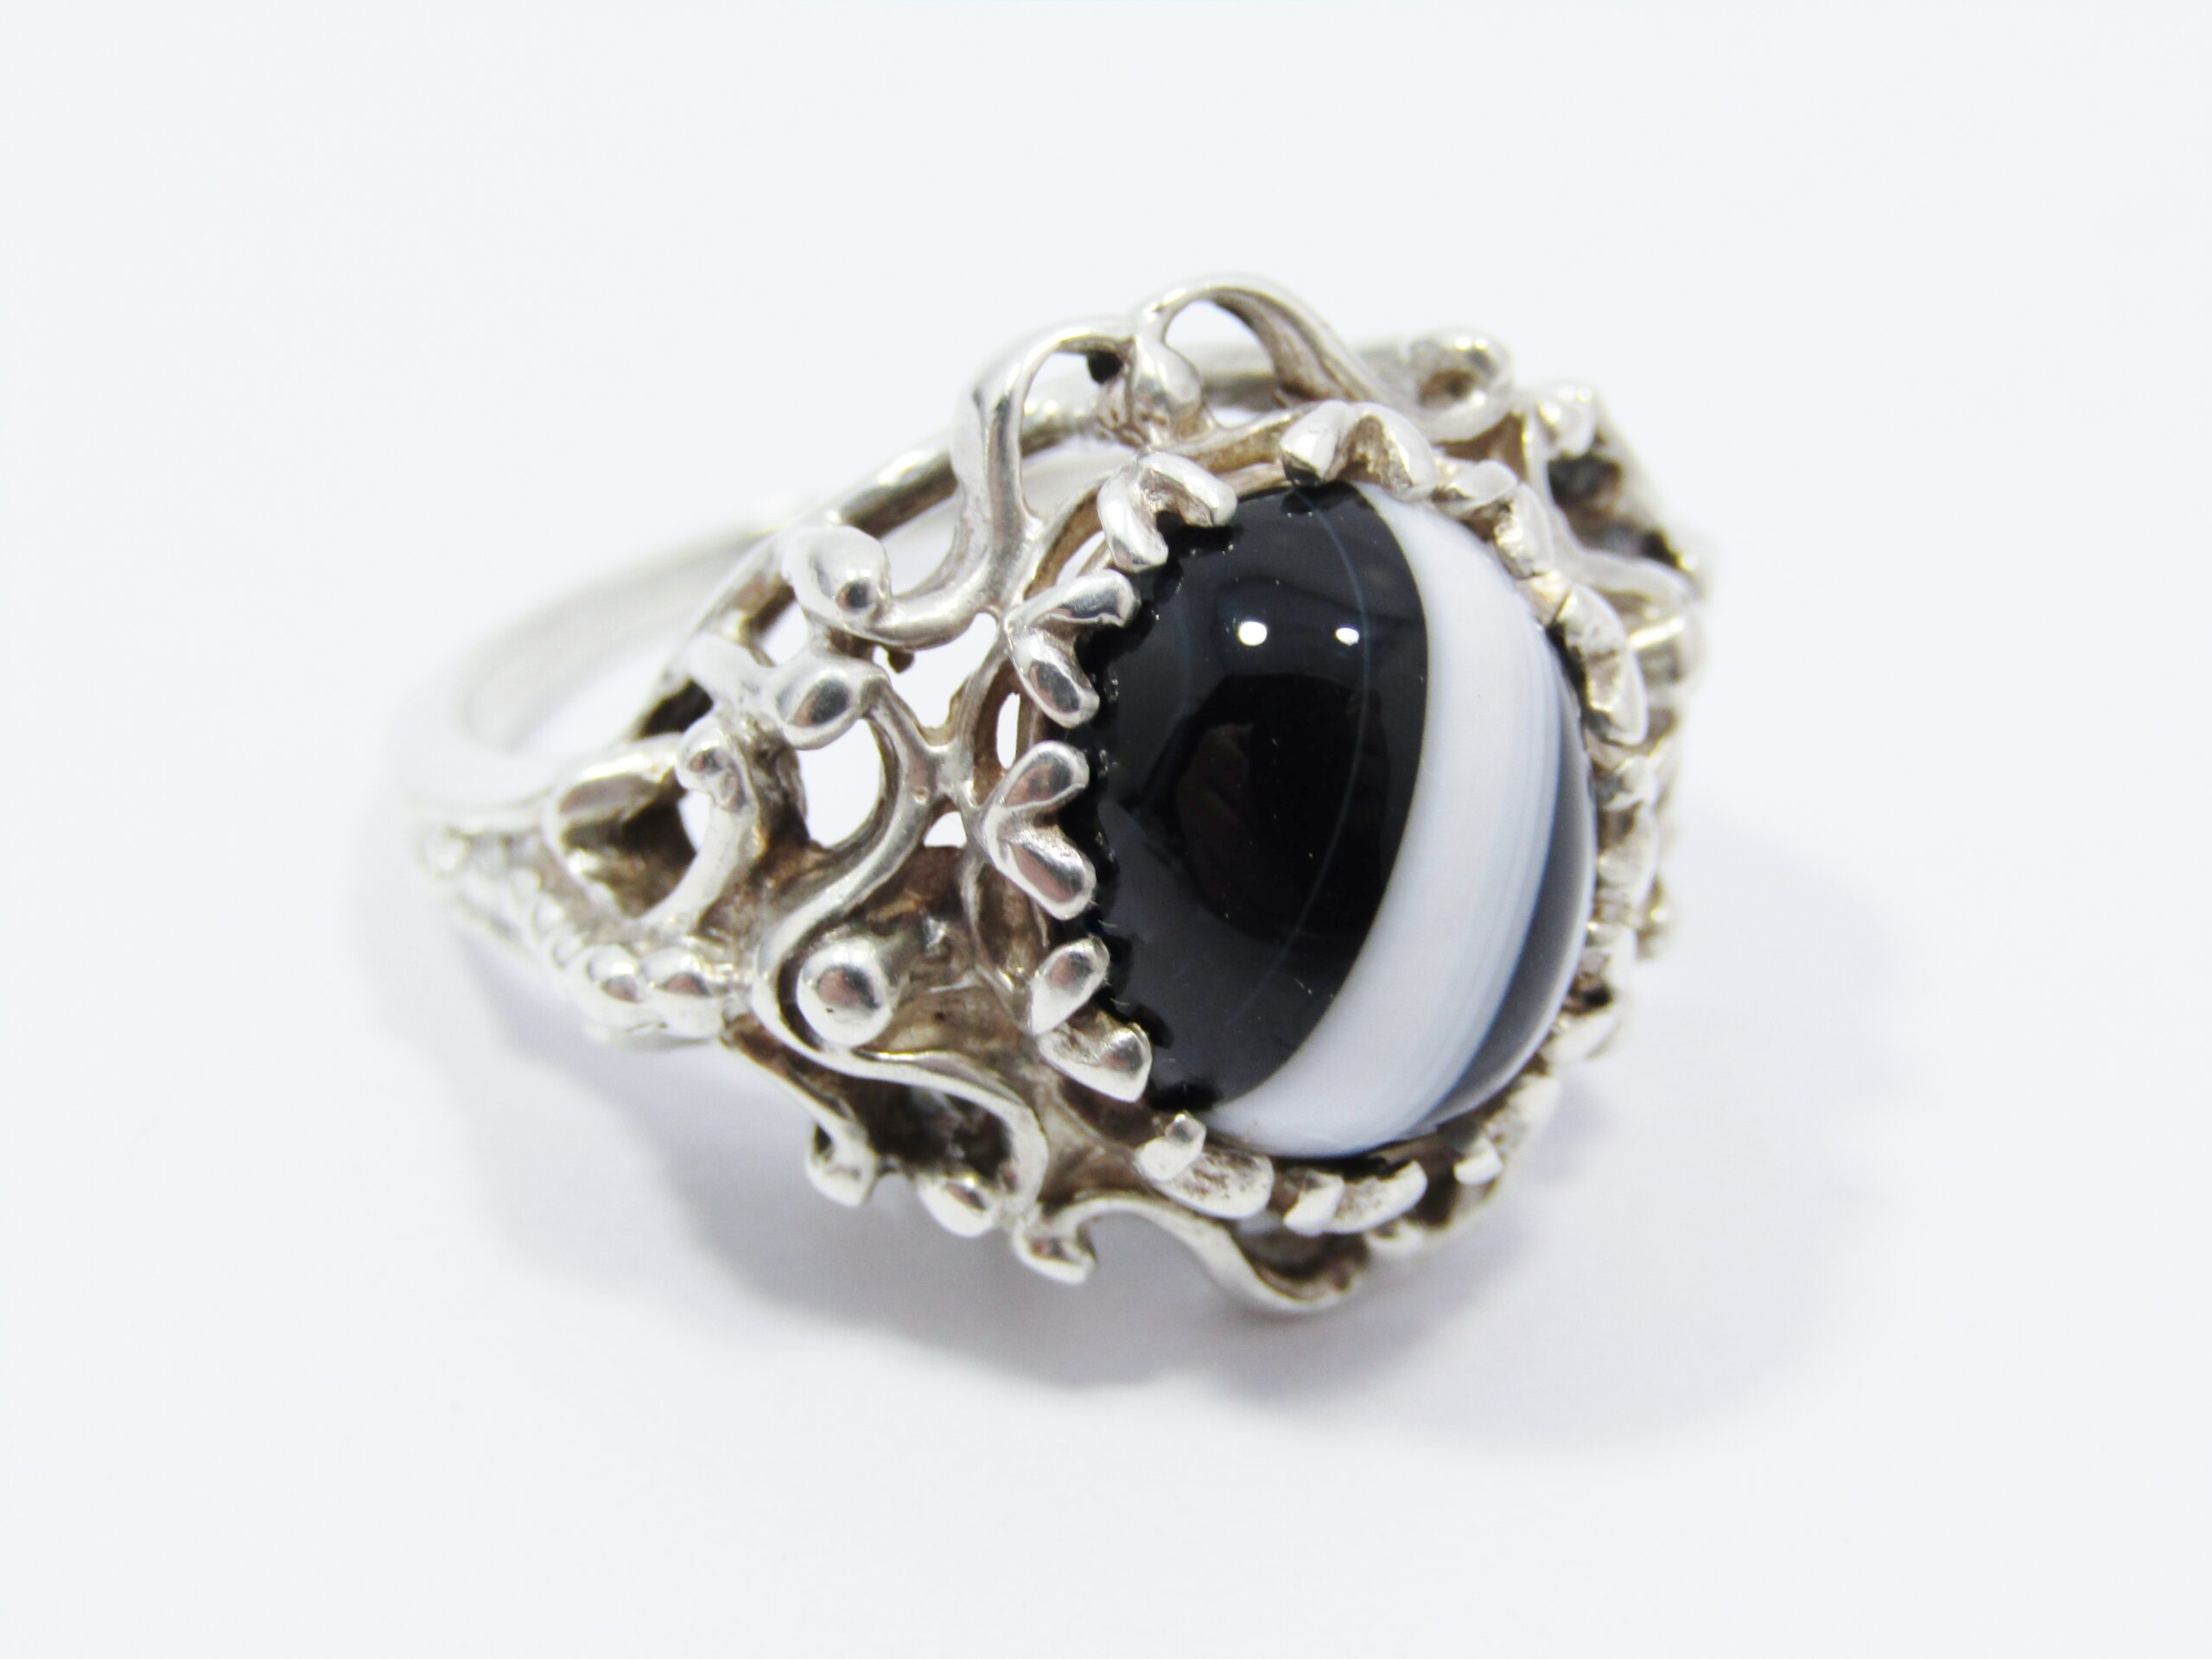 A Stunning Chunky Vintage Design Ring With a Banded Onyx Stone in Sterling Silver.